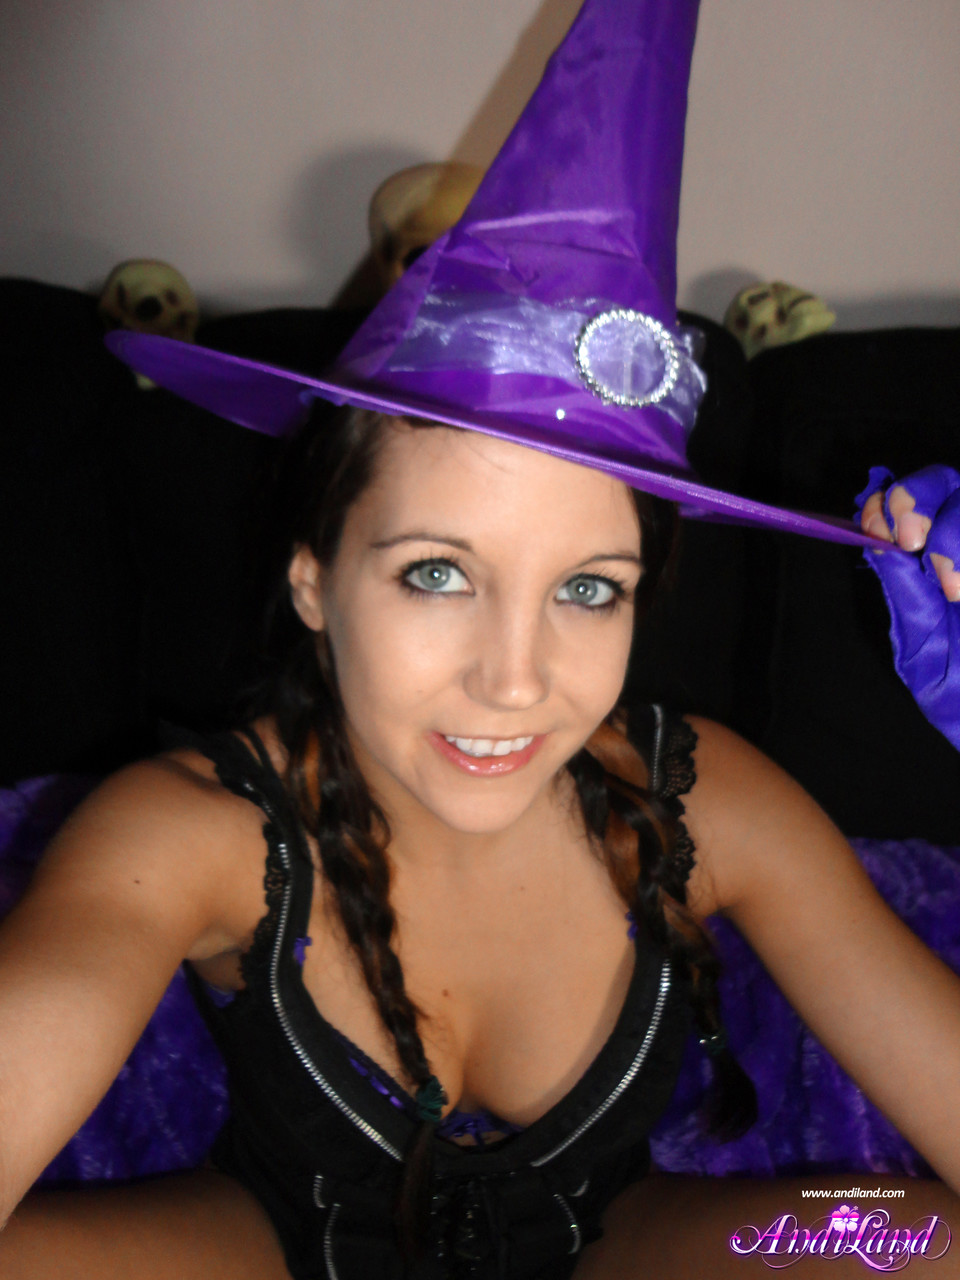 Teen amateur Andi Land teases during upskirt action in a Halloween outfit porn photo #428432666